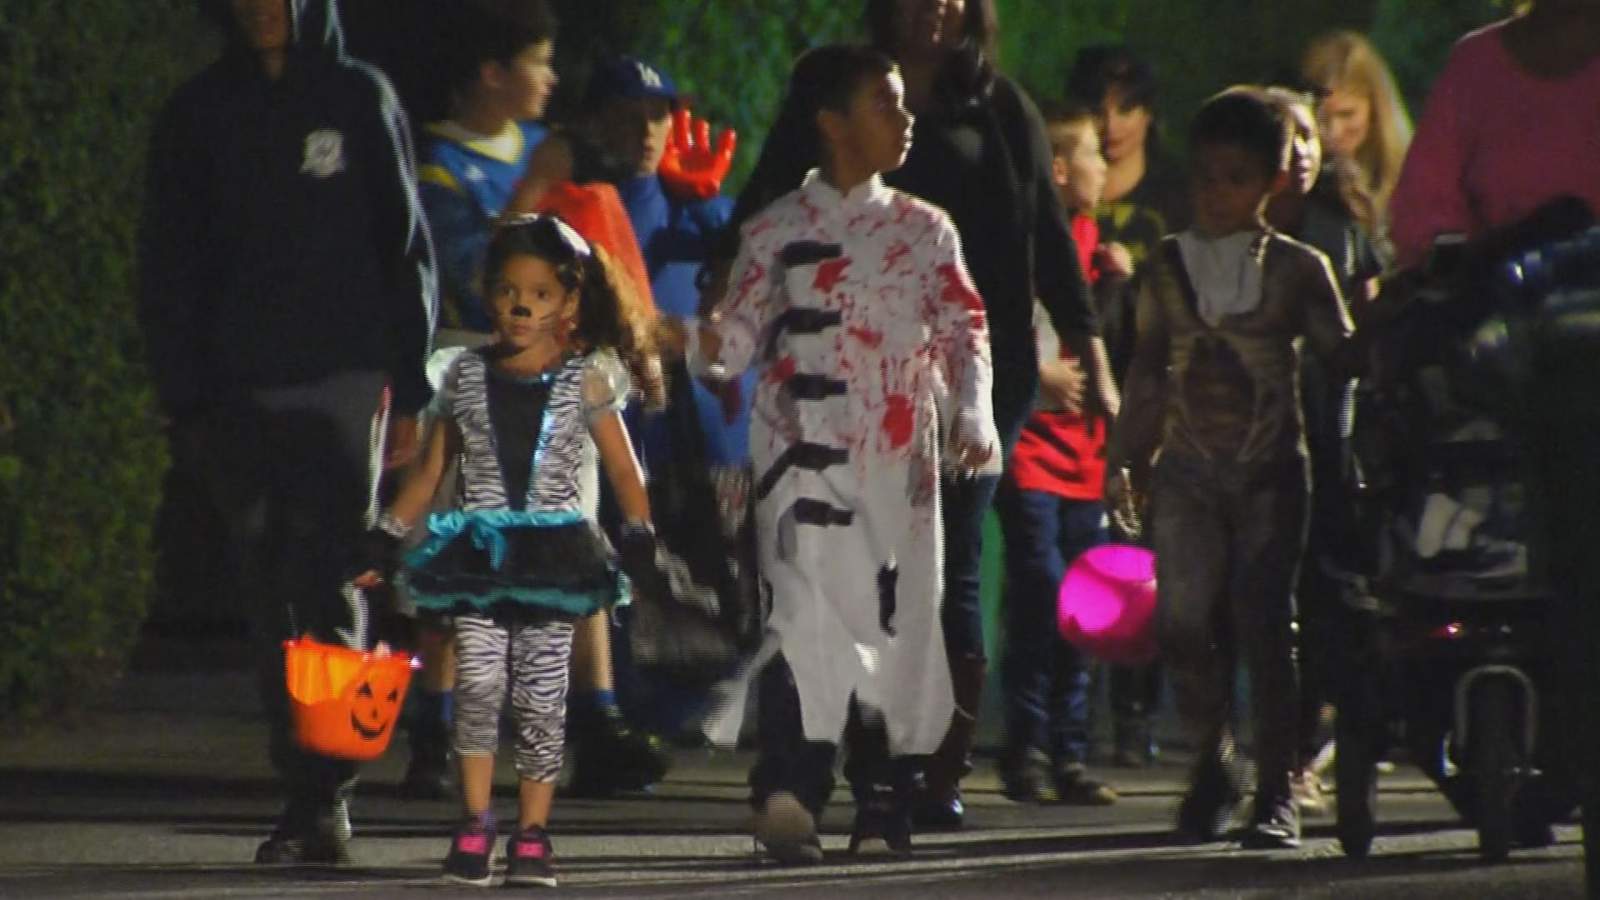 Tips & Tricks: Here’s how to trick-or-treat safely during COVID-19